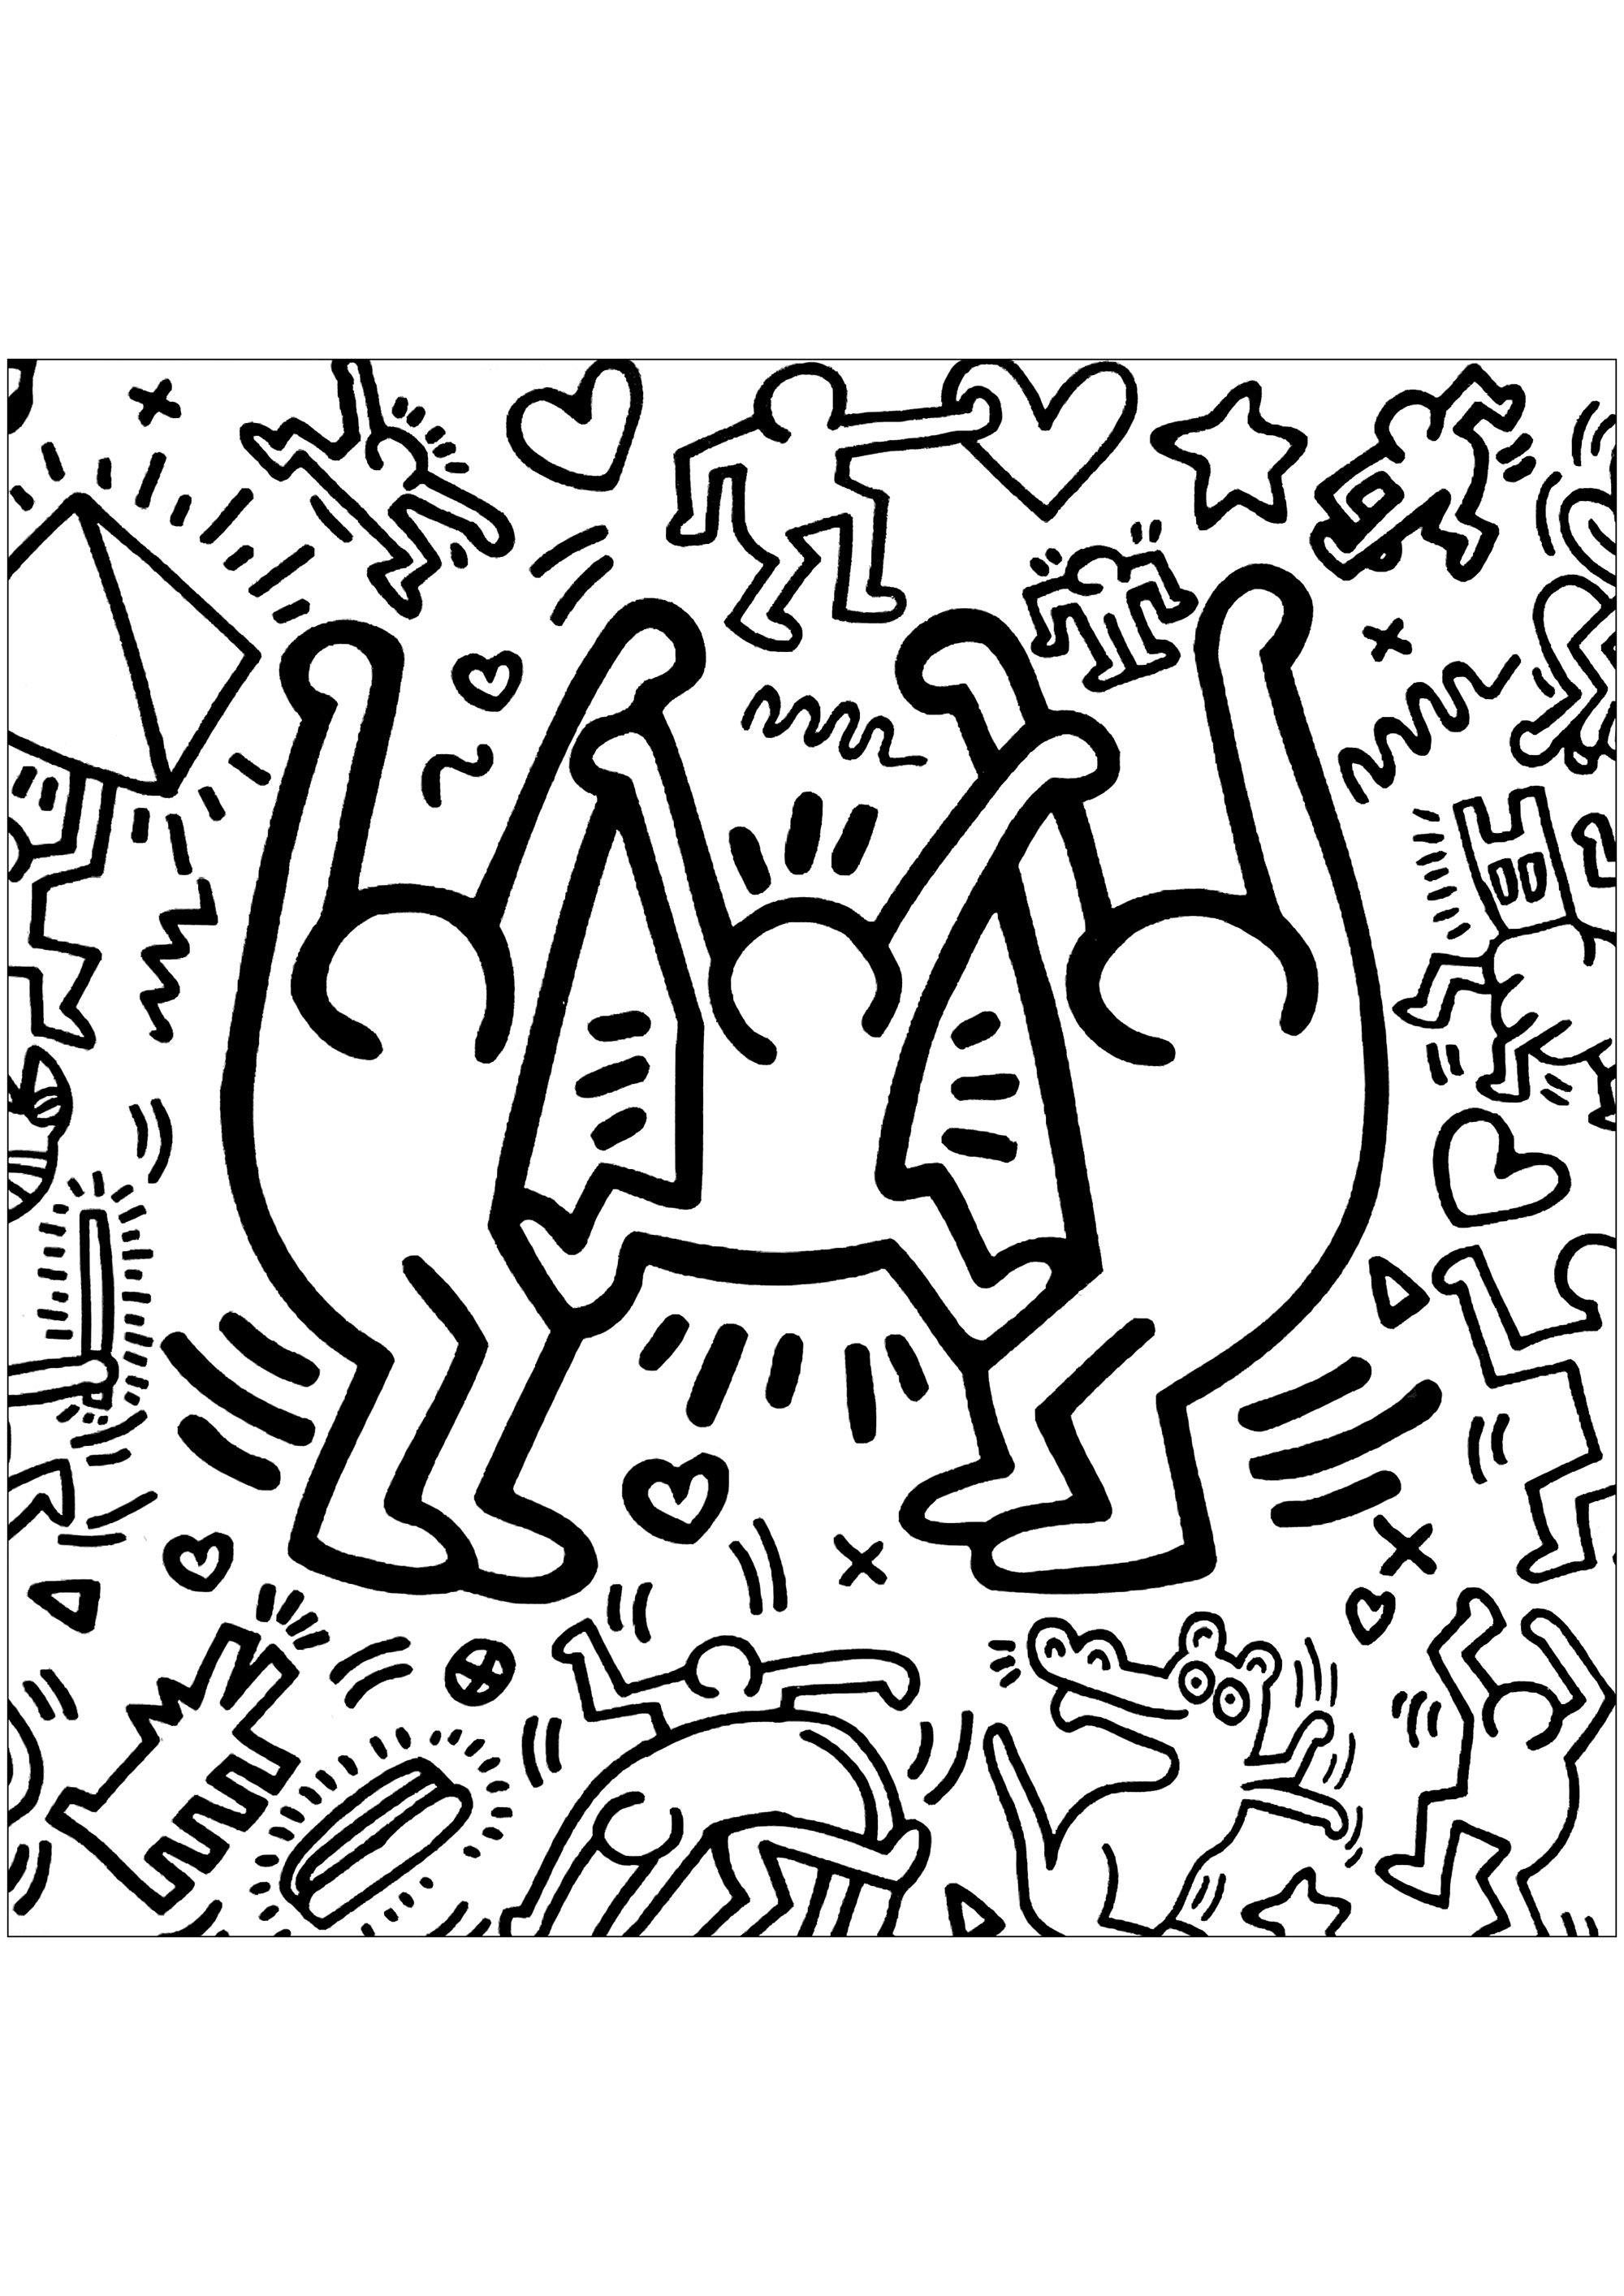 Color these three large happy characters and small ones (squared version). A coloring inspired by the artworks of Keith Haring